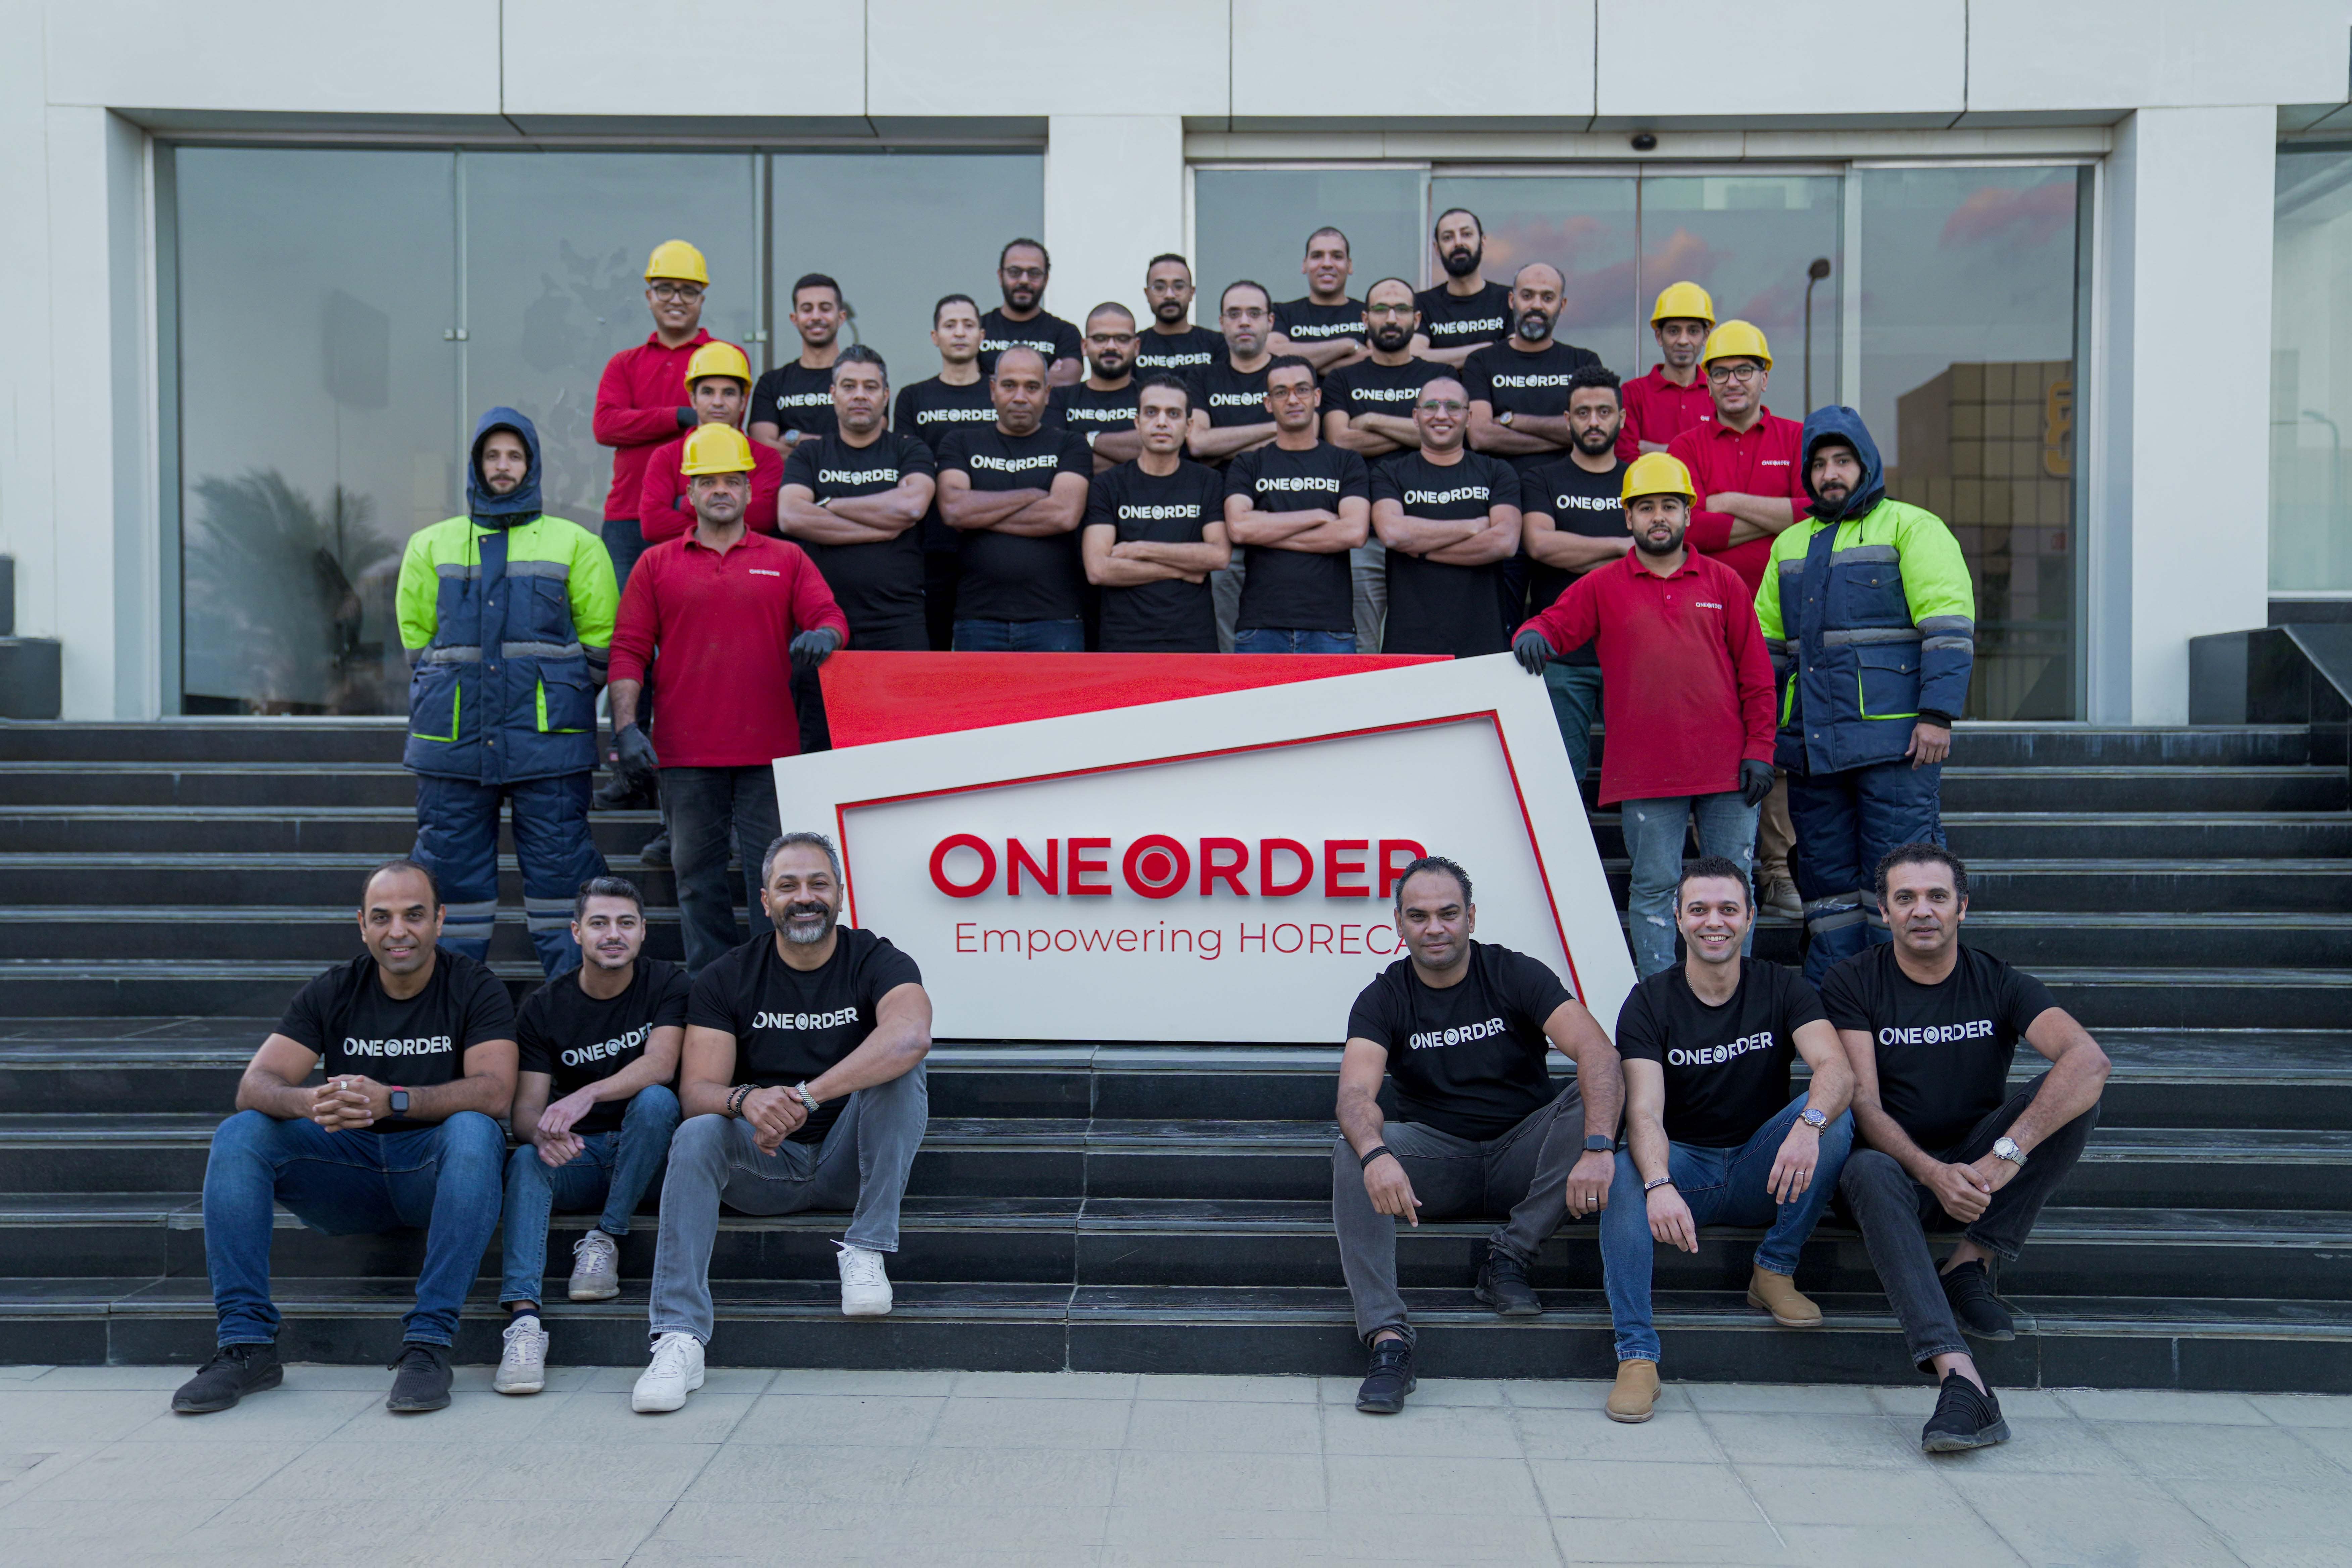 With M new funding, Egyptian startup OneOrder sets out on growth drive